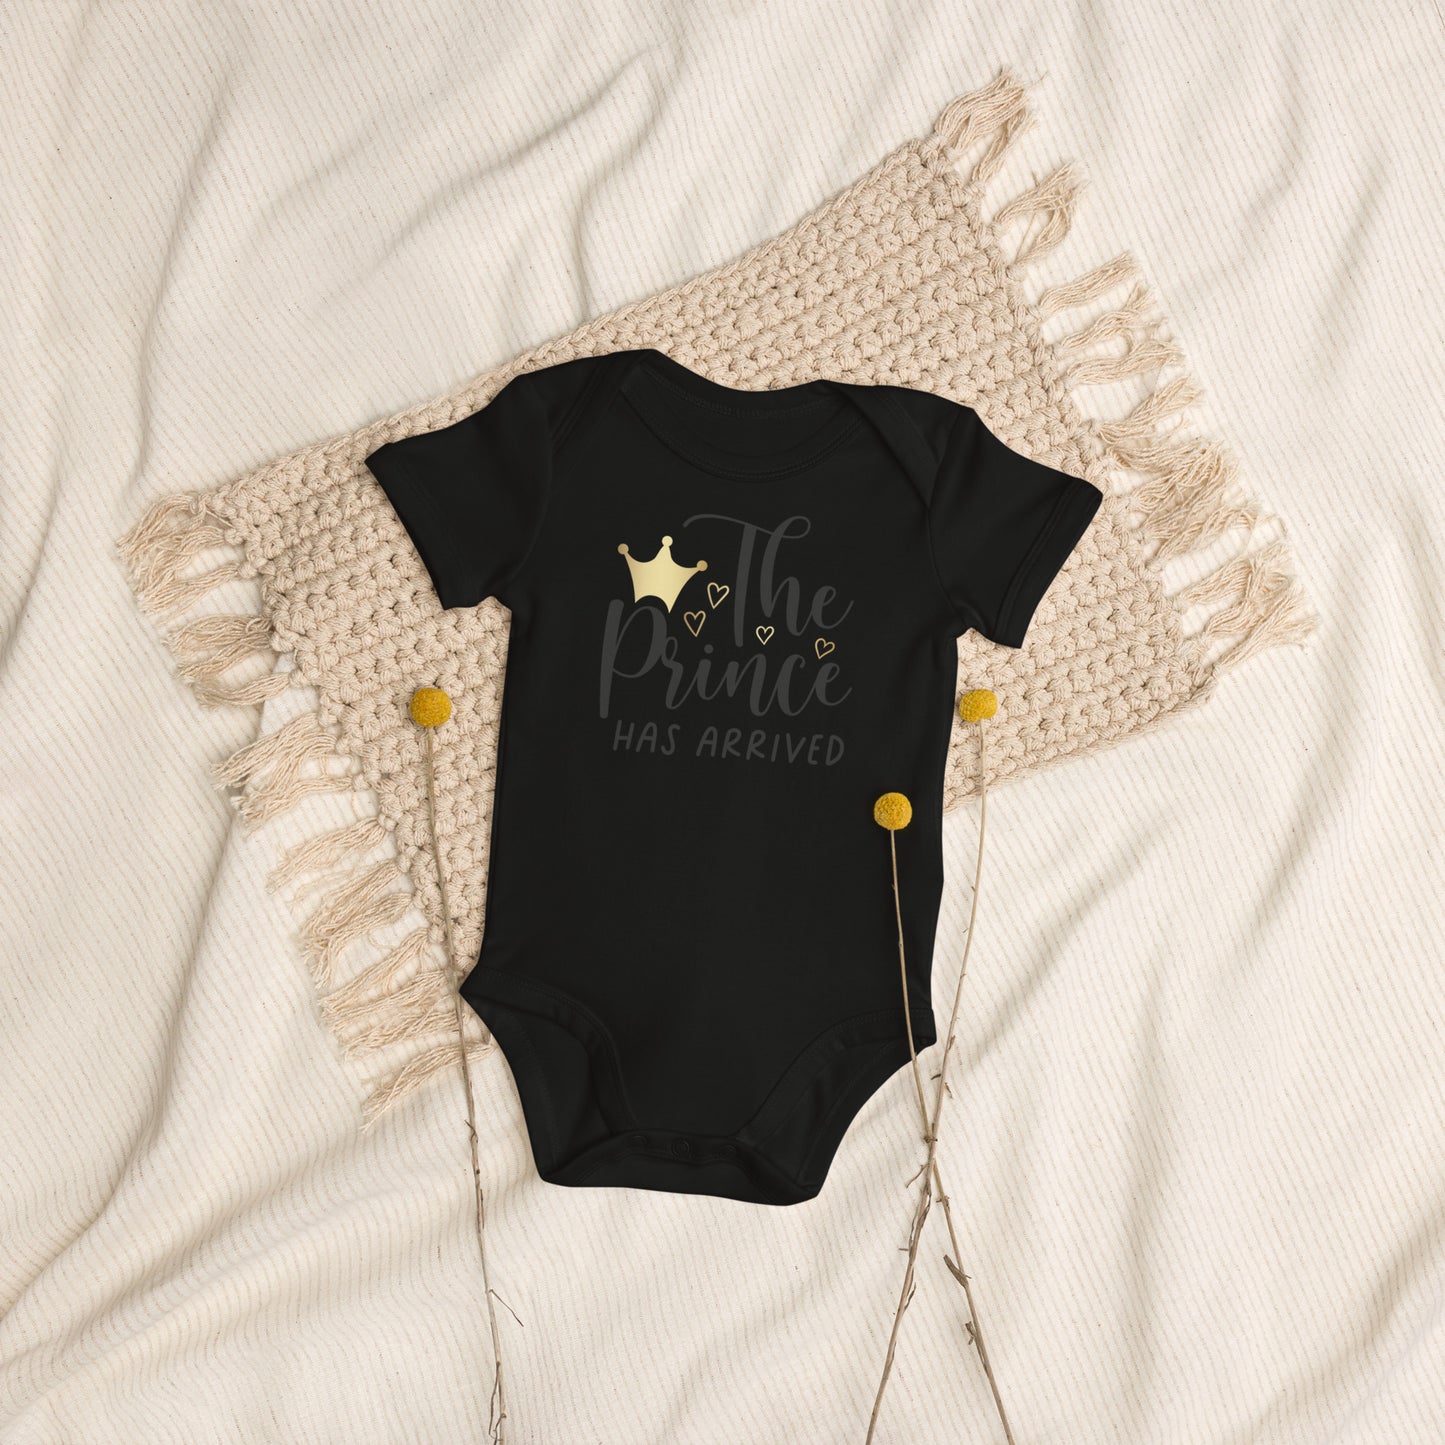 Organic cotton baby bodysuit - The Prince Has Arrived